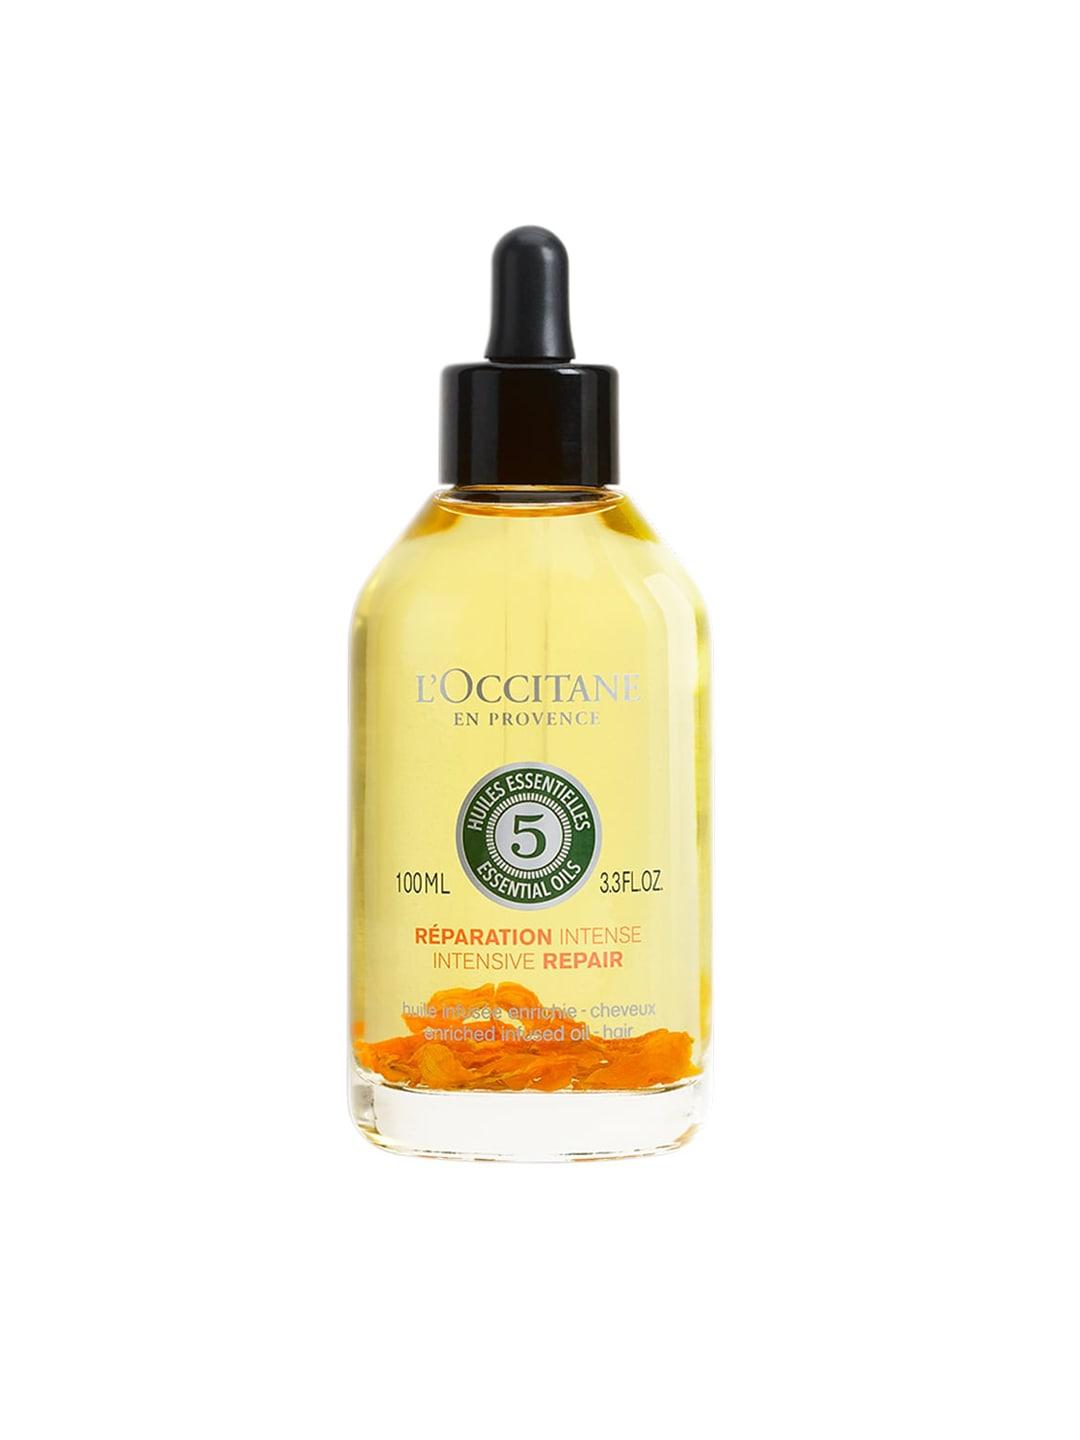 L'Occitane en Provence Intensive Repair Enriched Infused Oil 100ml